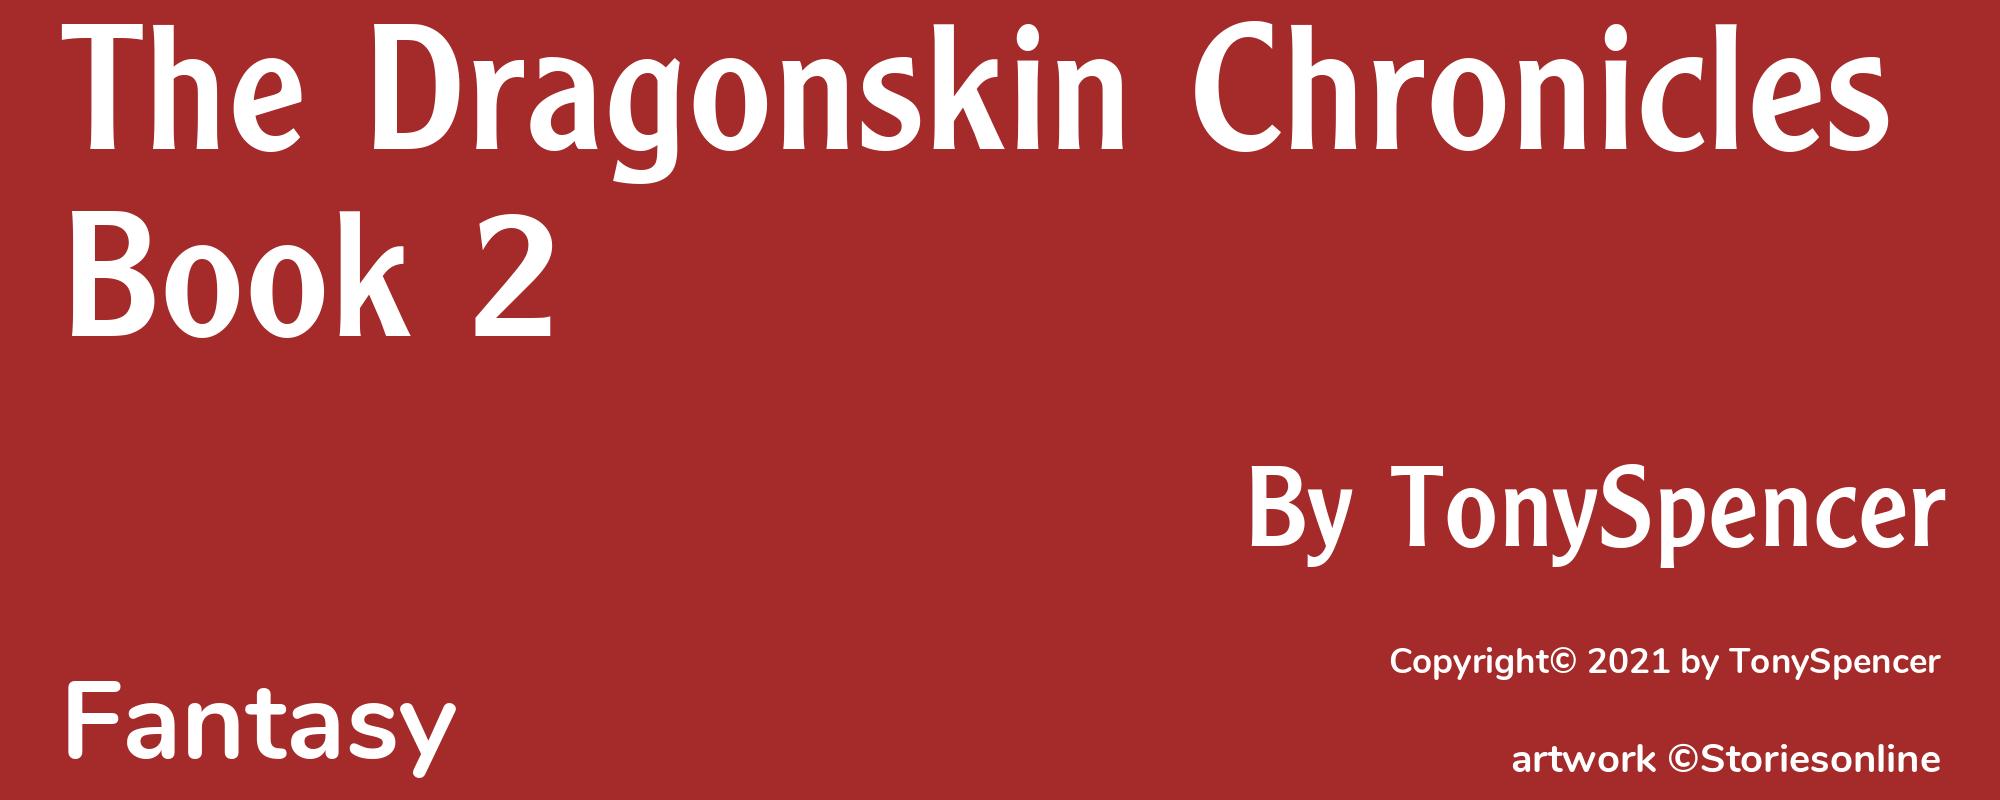 The Dragonskin Chronicles Book 2 - Cover